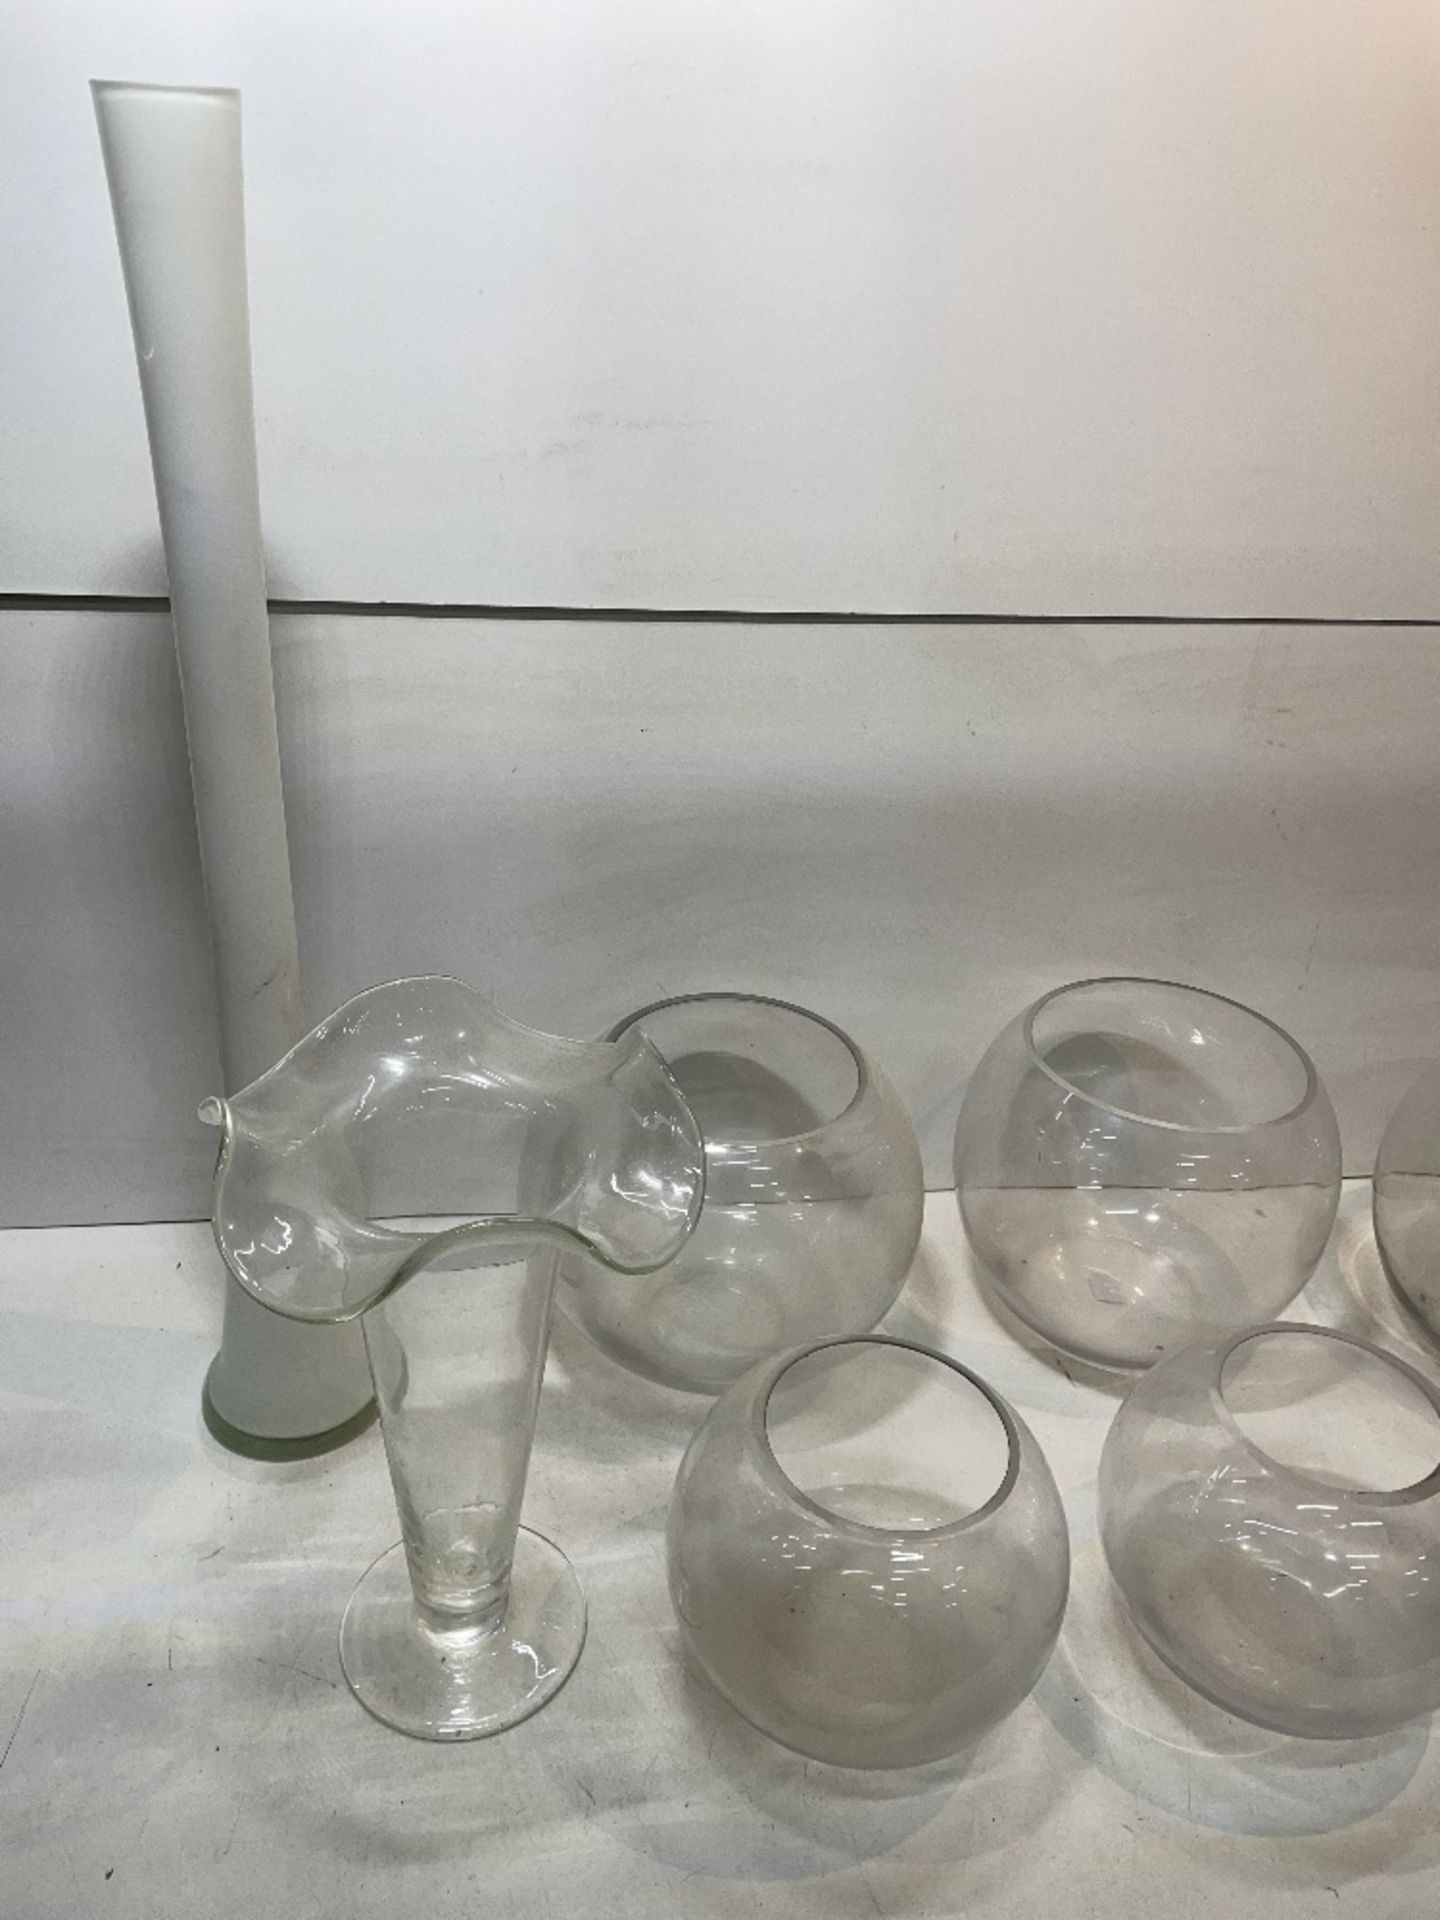 12 x Various Glass Vases - As Pictured - Image 3 of 4